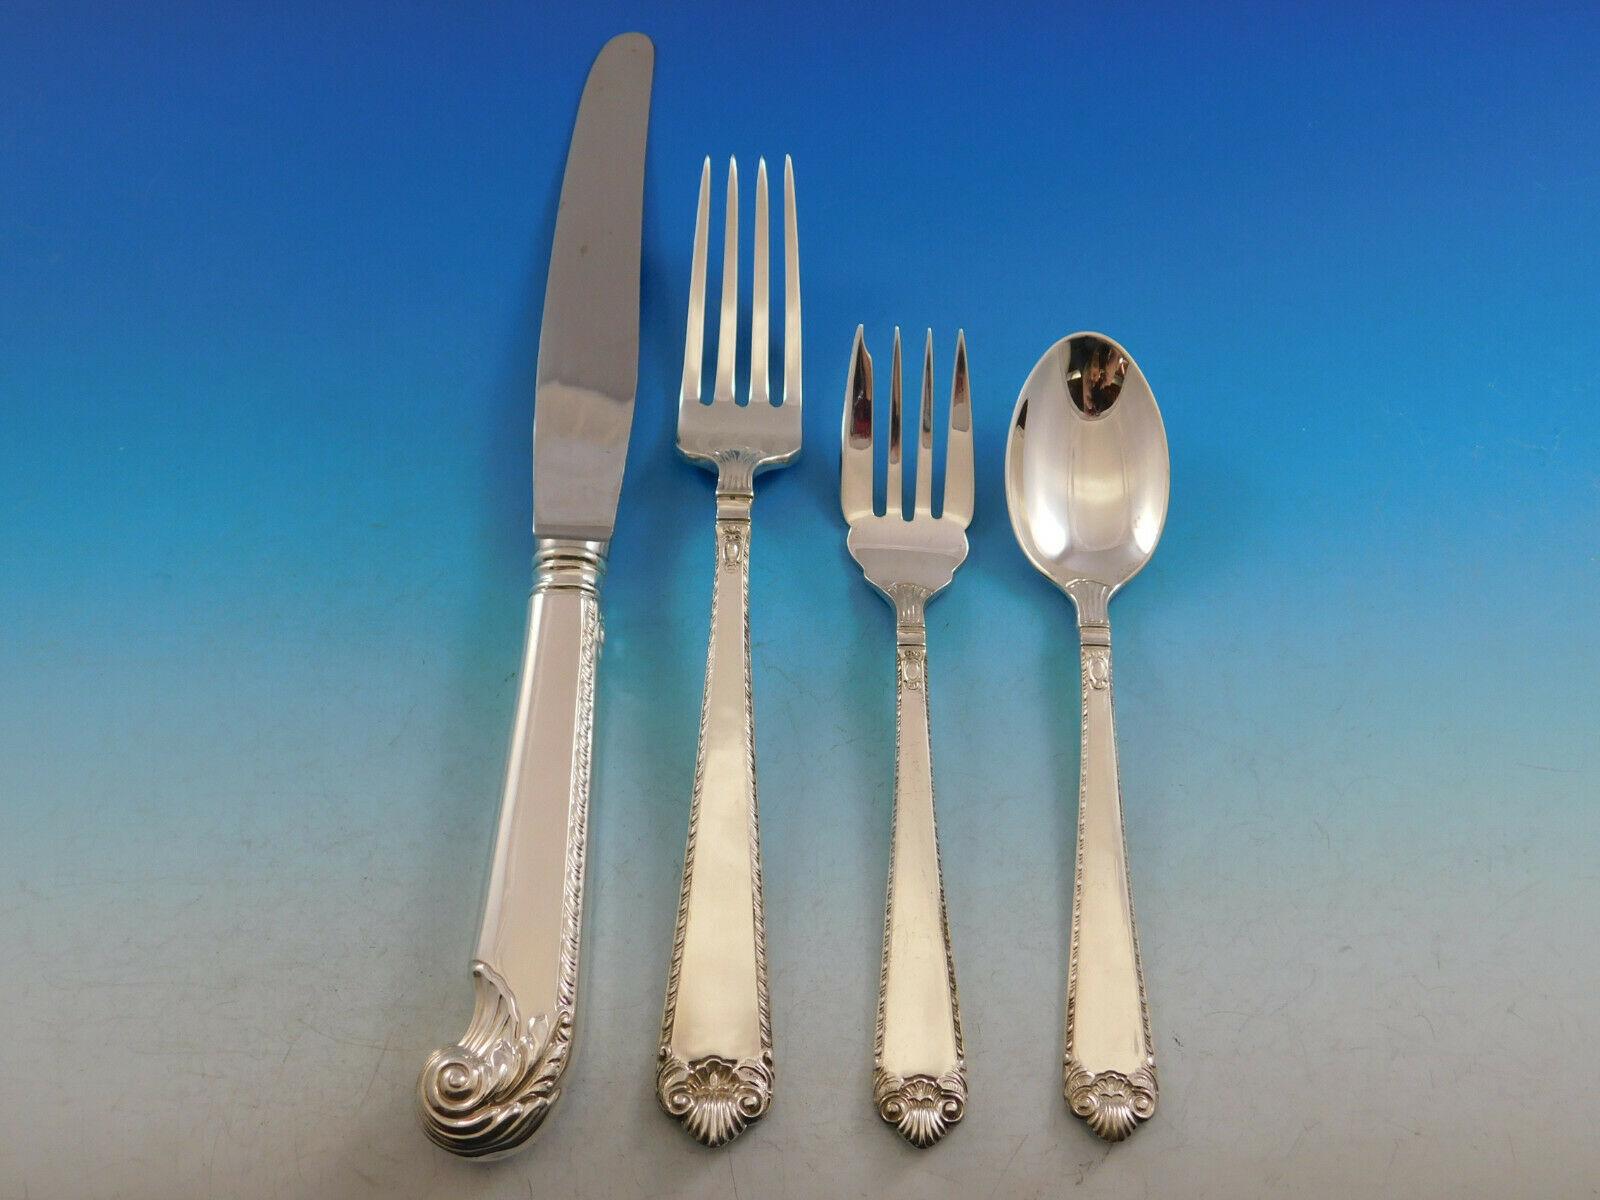 Impressive George II by Birks Sterling Silver flatware set - 69 pieces. This set includes:

8 dinner size knives w/pistol grip handles, 9 3/4